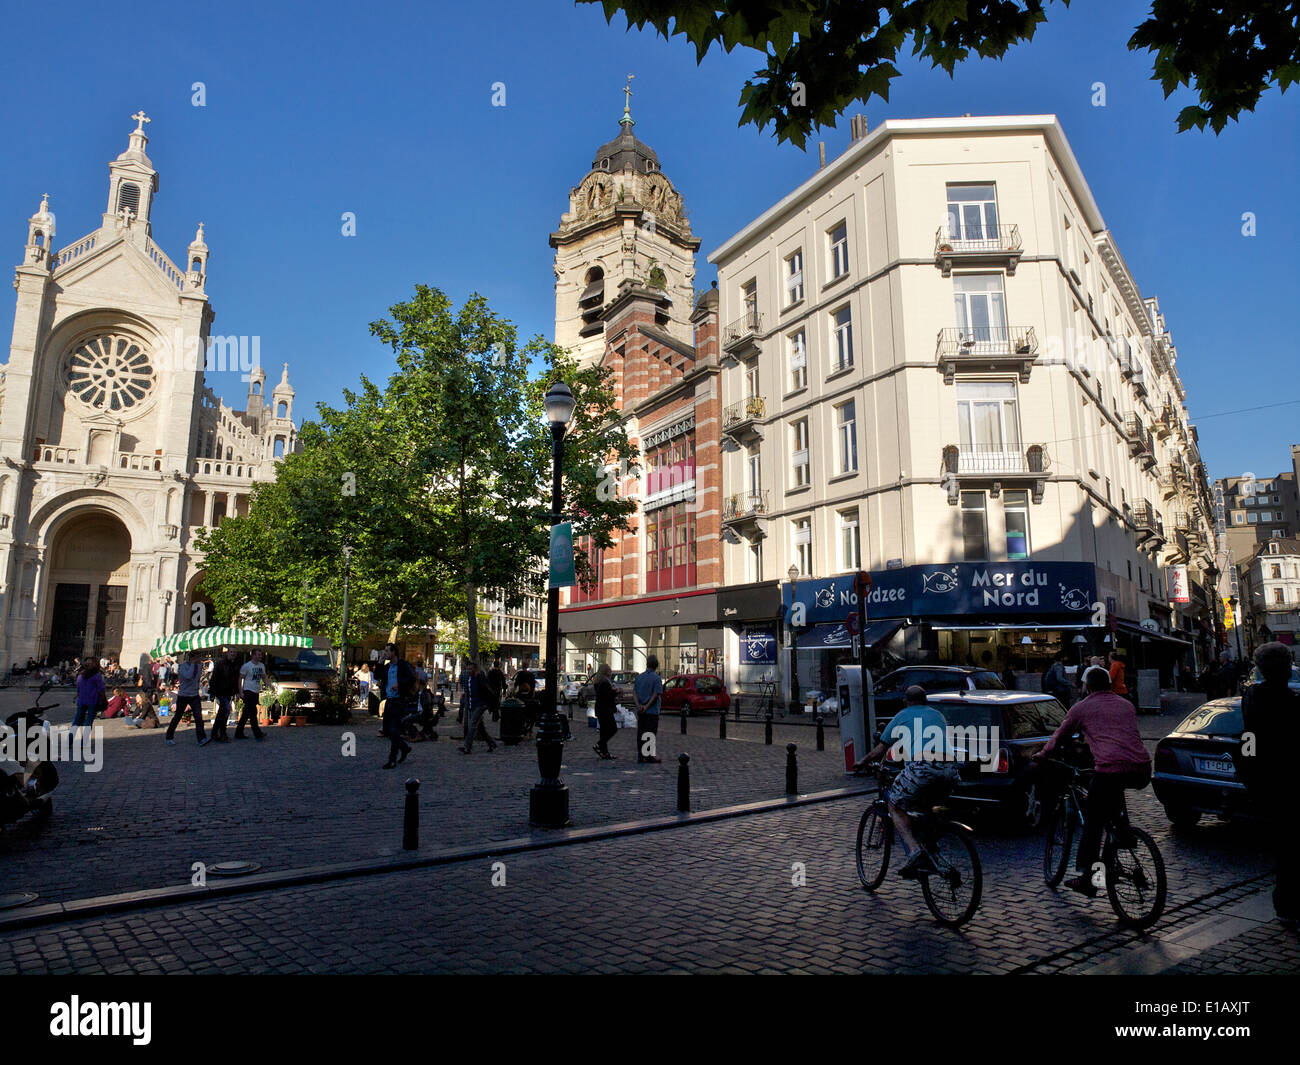 The Saint Katelijne square in the city center of Brussels with the famous Mer du Nord / Noordzee fishmongers. Stock Photo